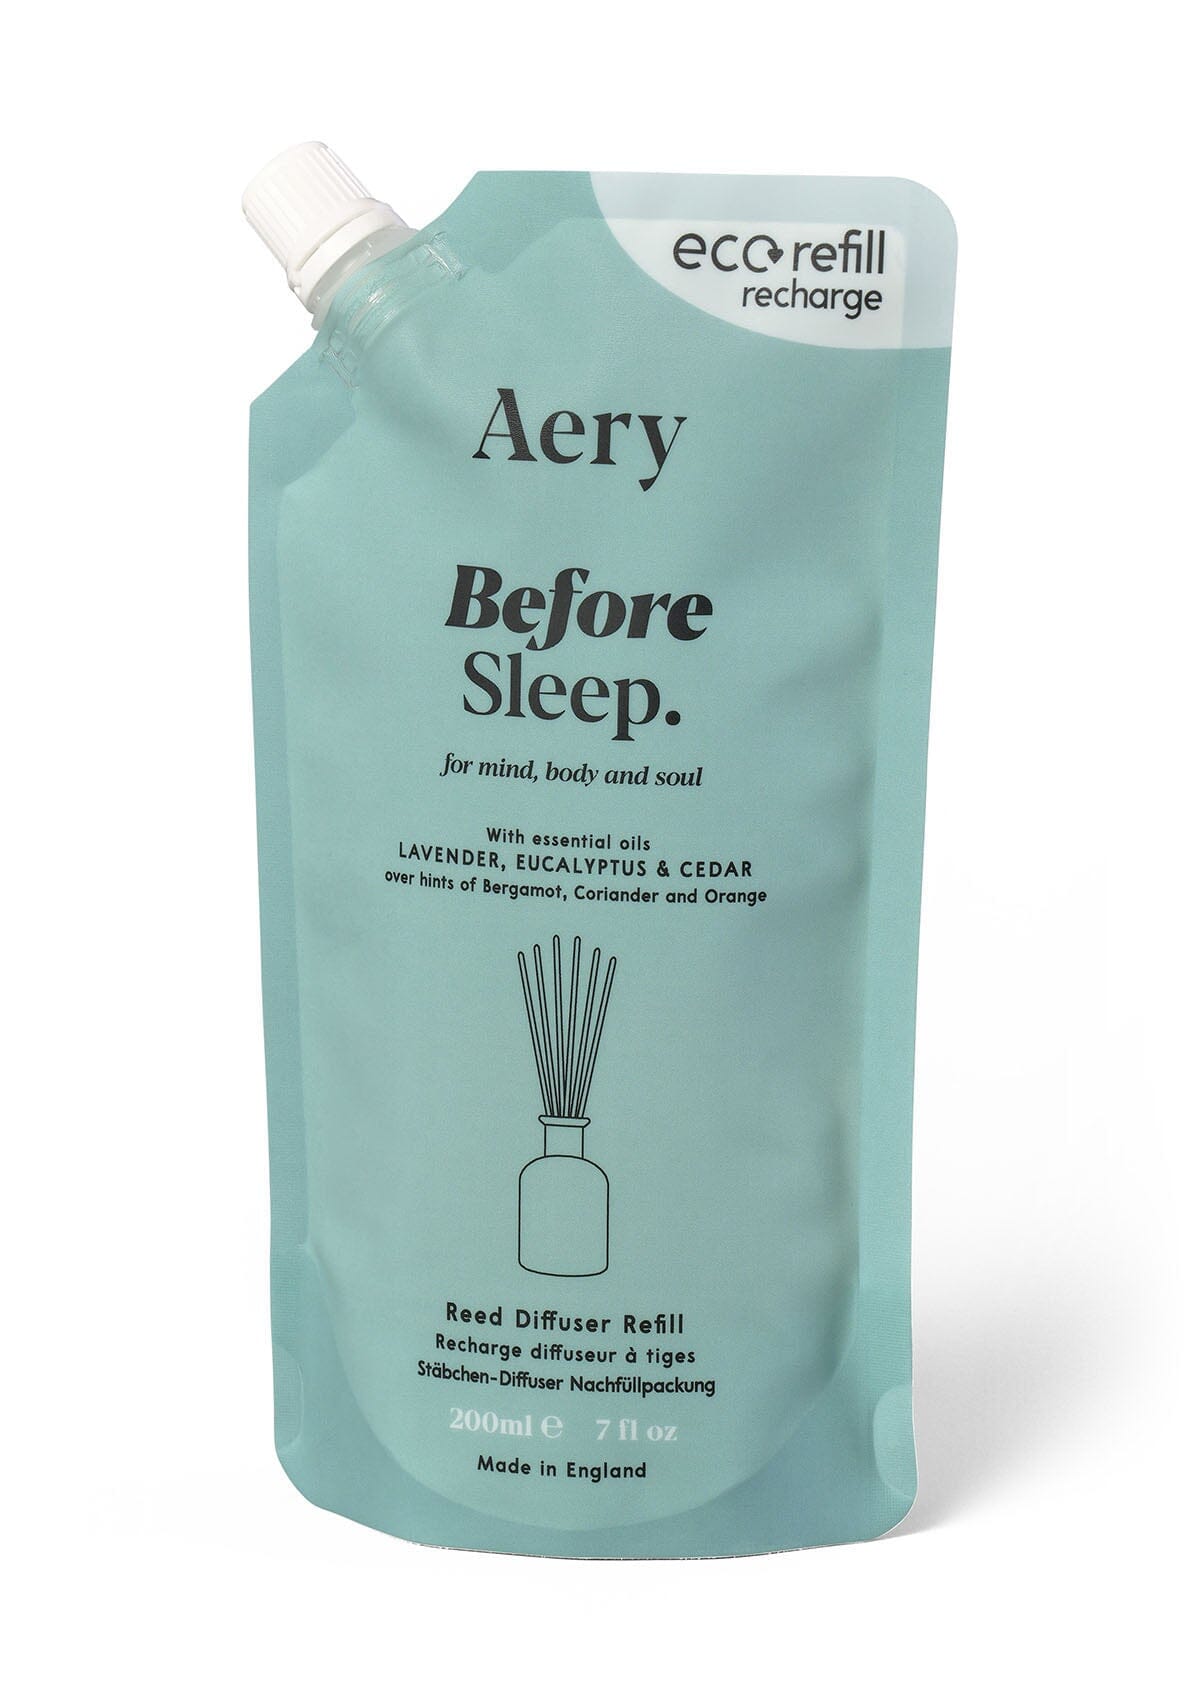 Blue Before Sleep reed diffuser refill pouch by aery on white background 